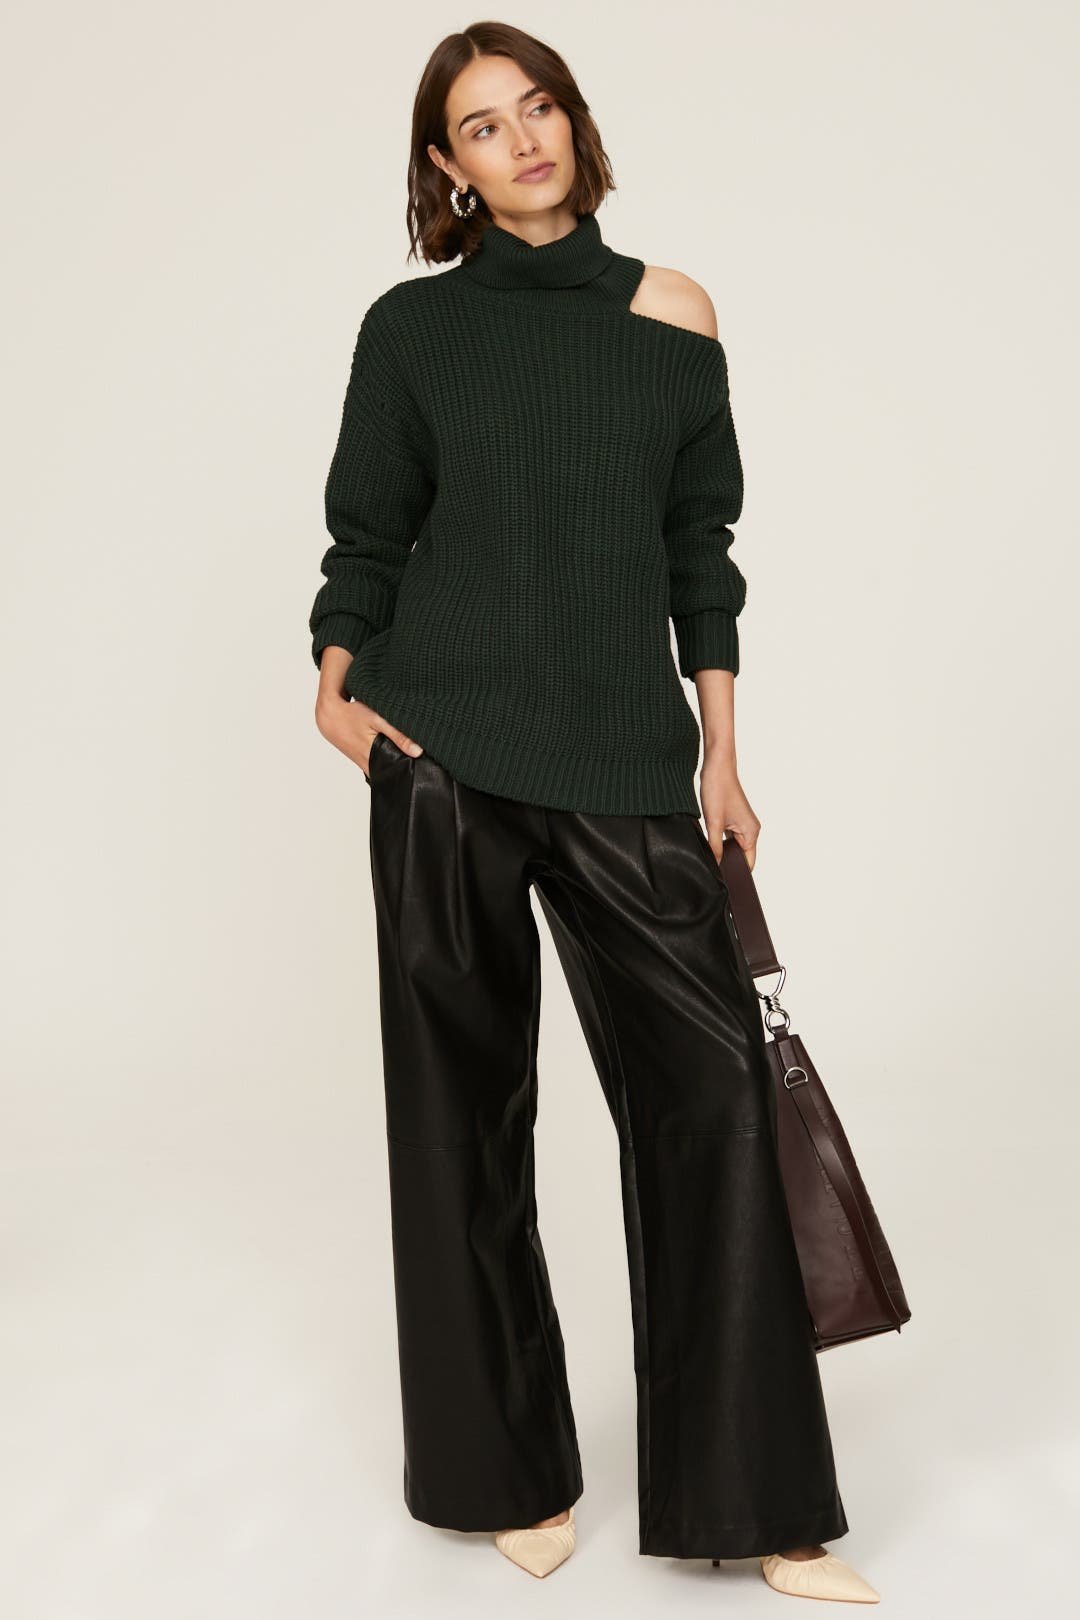 fall fashion sweaters rtr peter som green